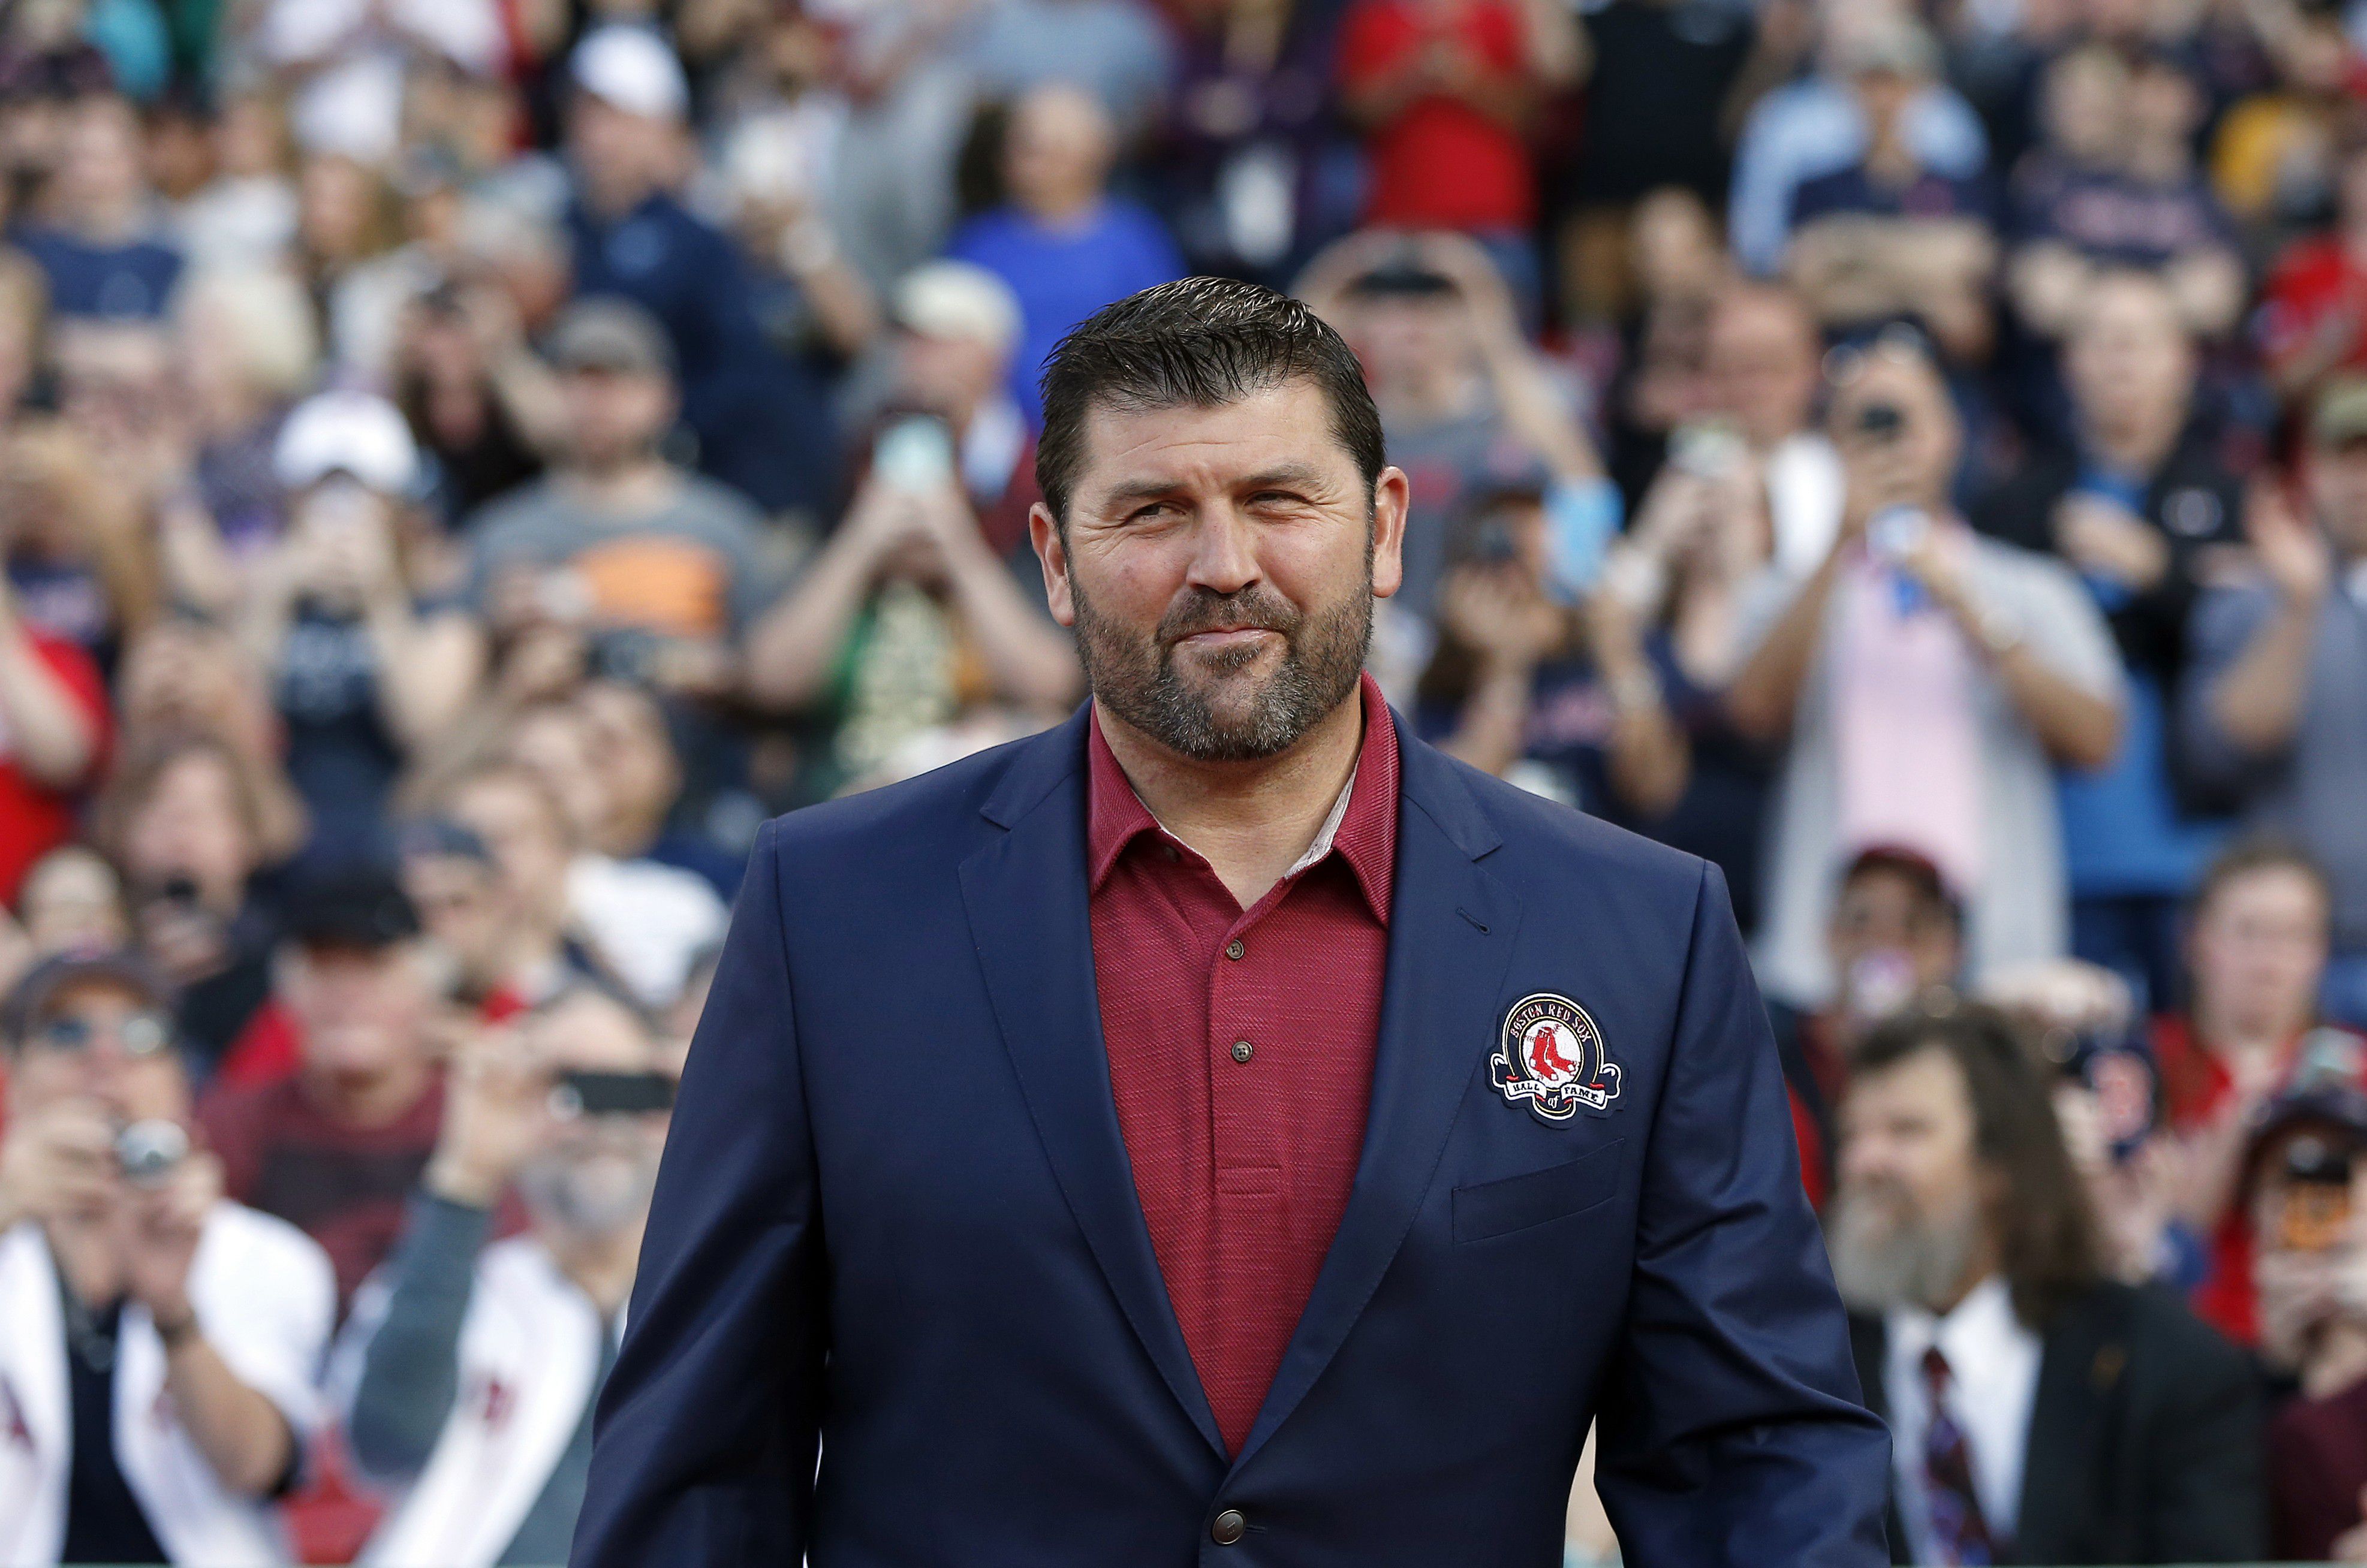 Boston Red Sox coach Jason Varitek wants to manage in majors someday: 'That  would definitely be a hope' (report) 